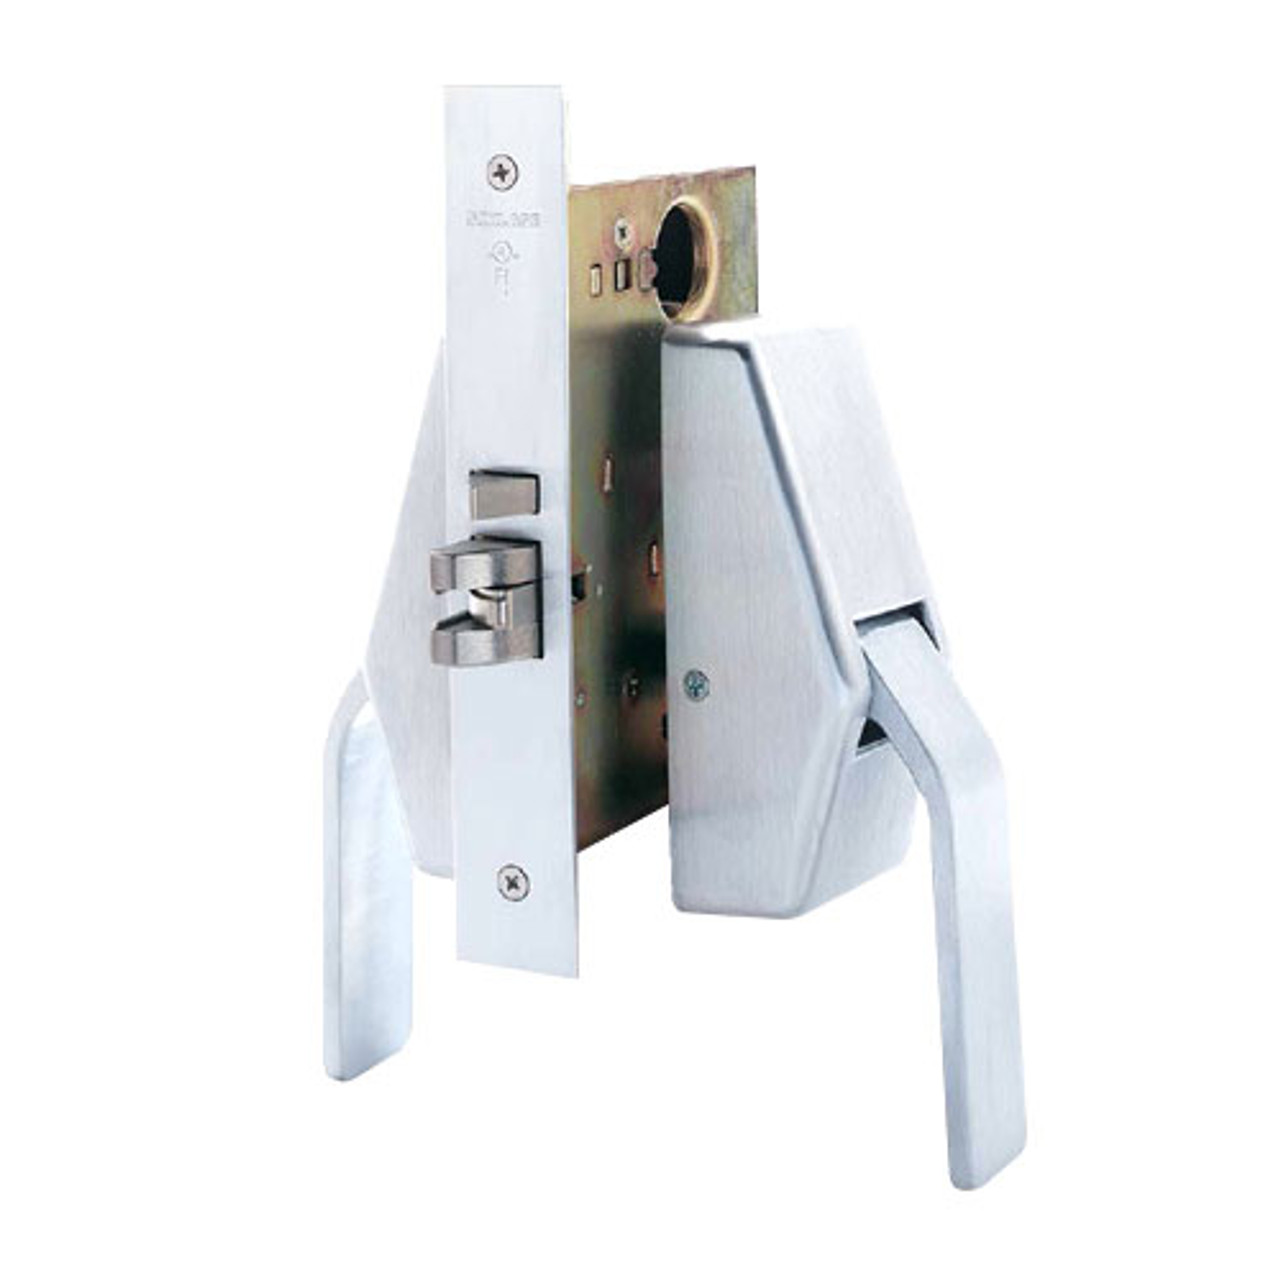 HL6-9050-625 Glynn Johnson HL6 Series Office/Inner Entry Thumbturn Function Push and Pull latch with Mortise Lock in Bright Chrome Finish